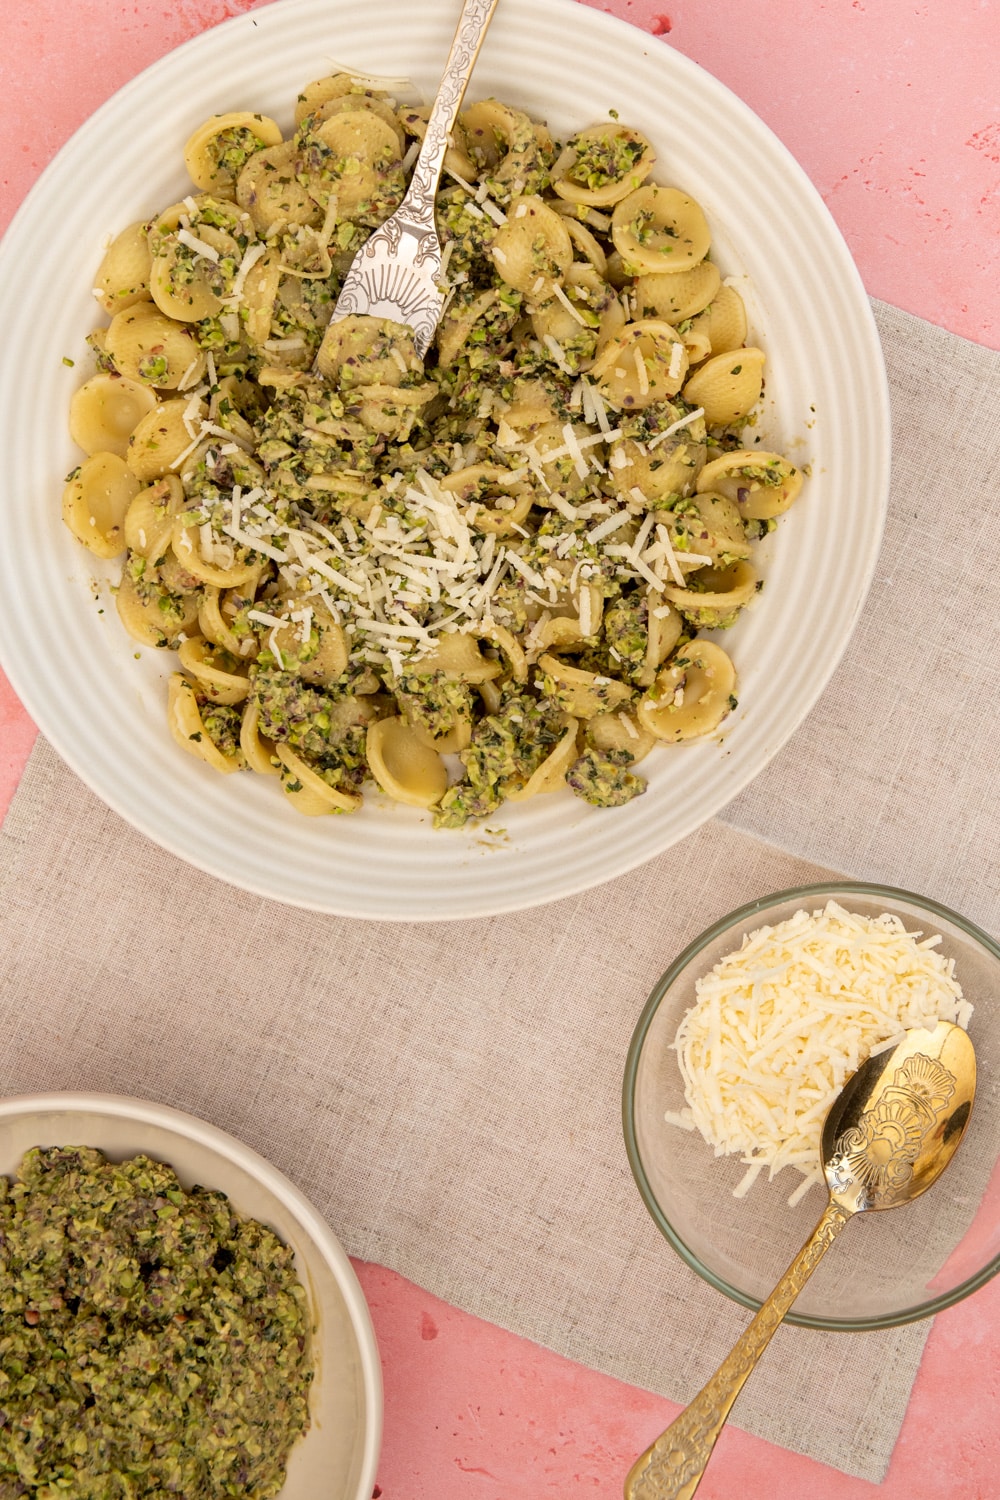 Pistachio pasta served with parmesan cheese and pistachio pesto on a side to be added